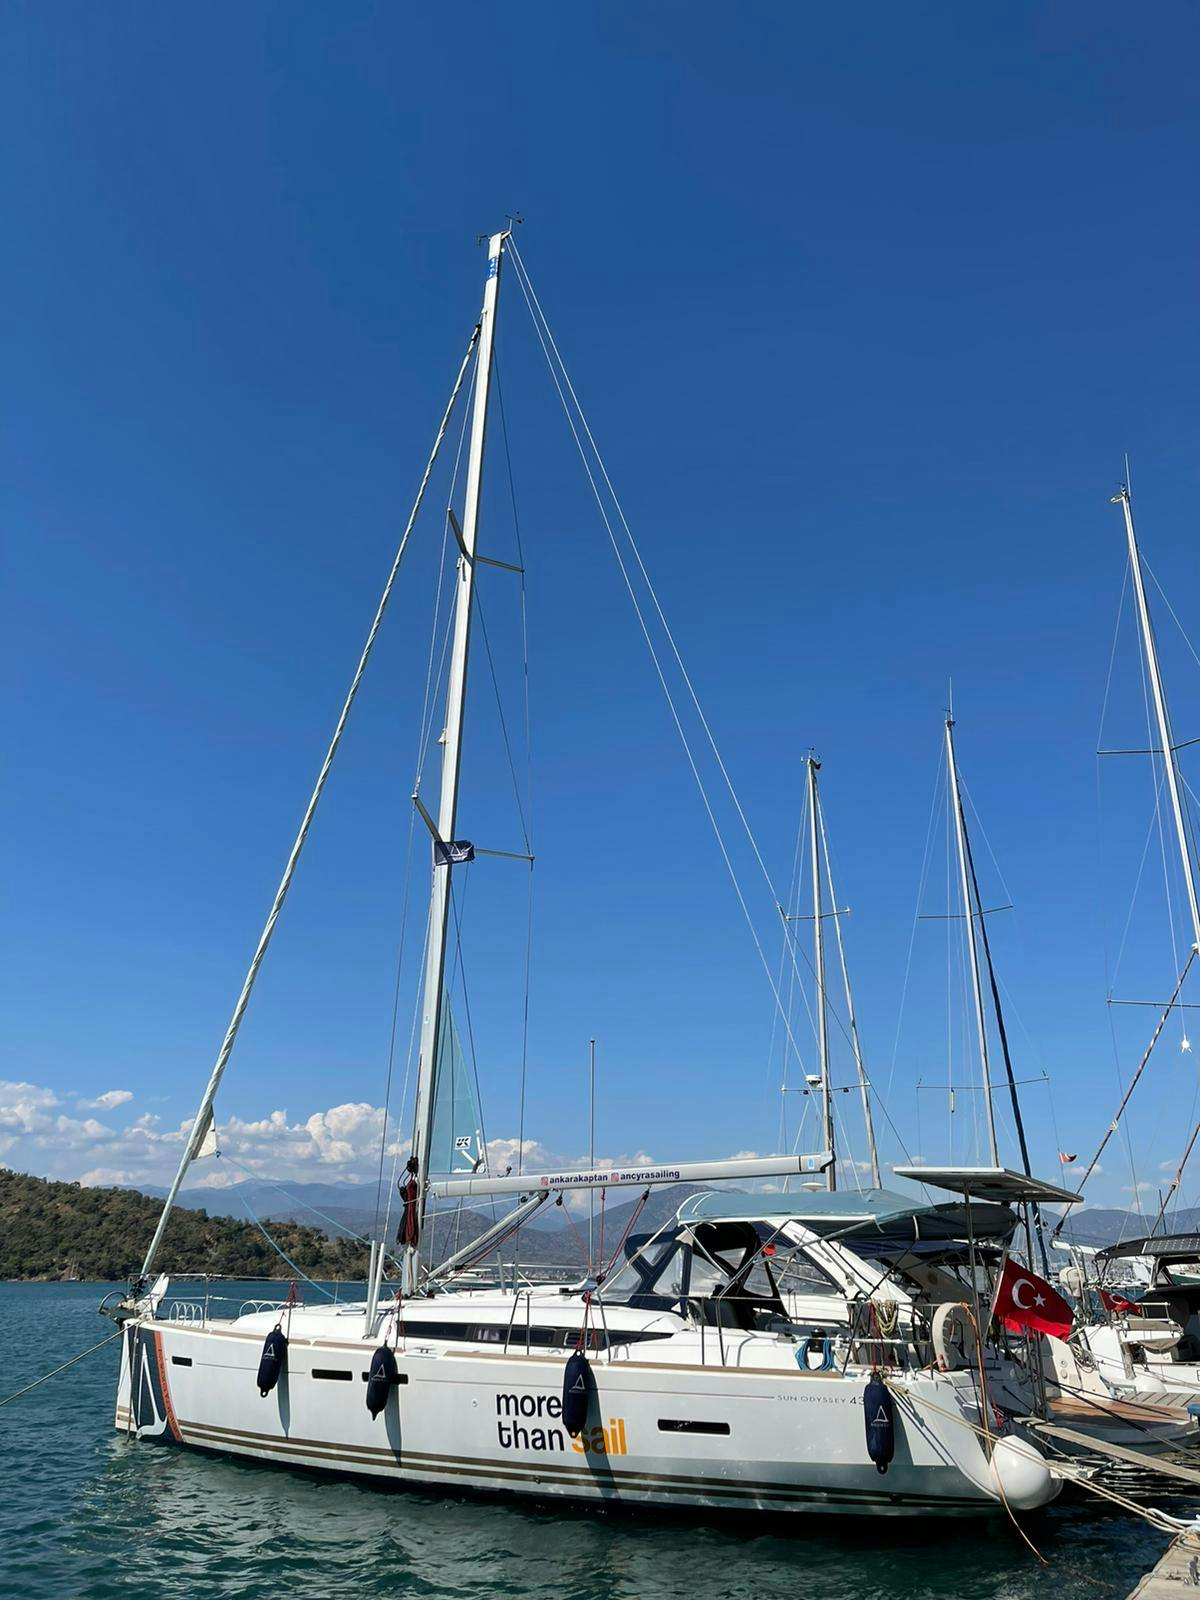 Book Sun Odyssey 439 Sailing yacht for bareboat charter in Fethiye, Yacht Club Mai, Mediterranean, Turkey with TripYacht!, picture 3